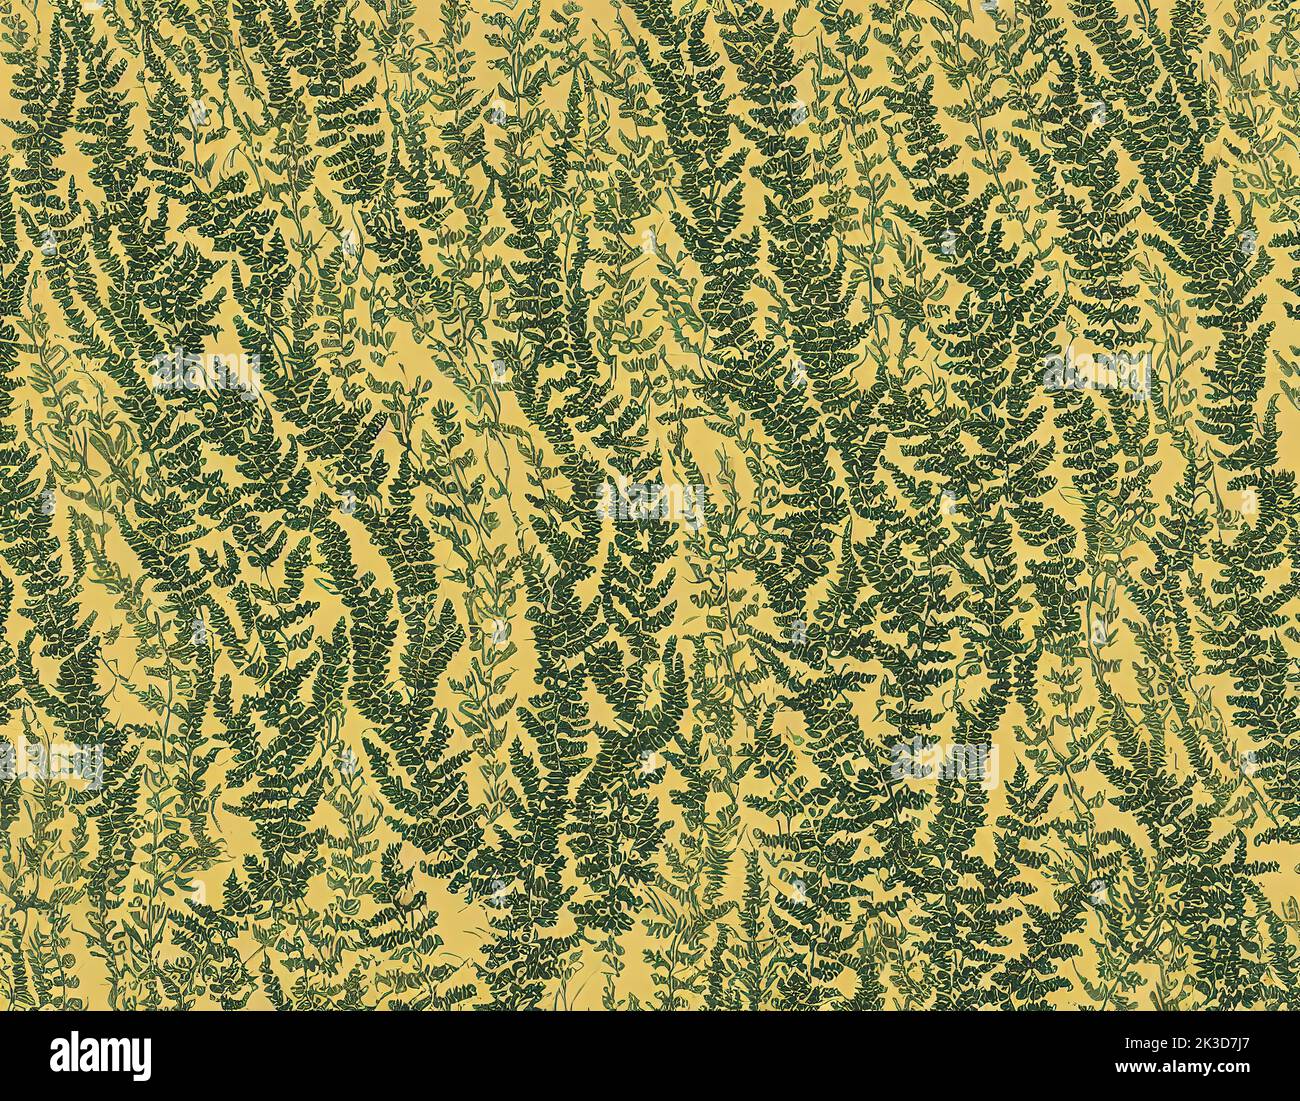 Illustration of abstract fern leaves pattern Stock Photo